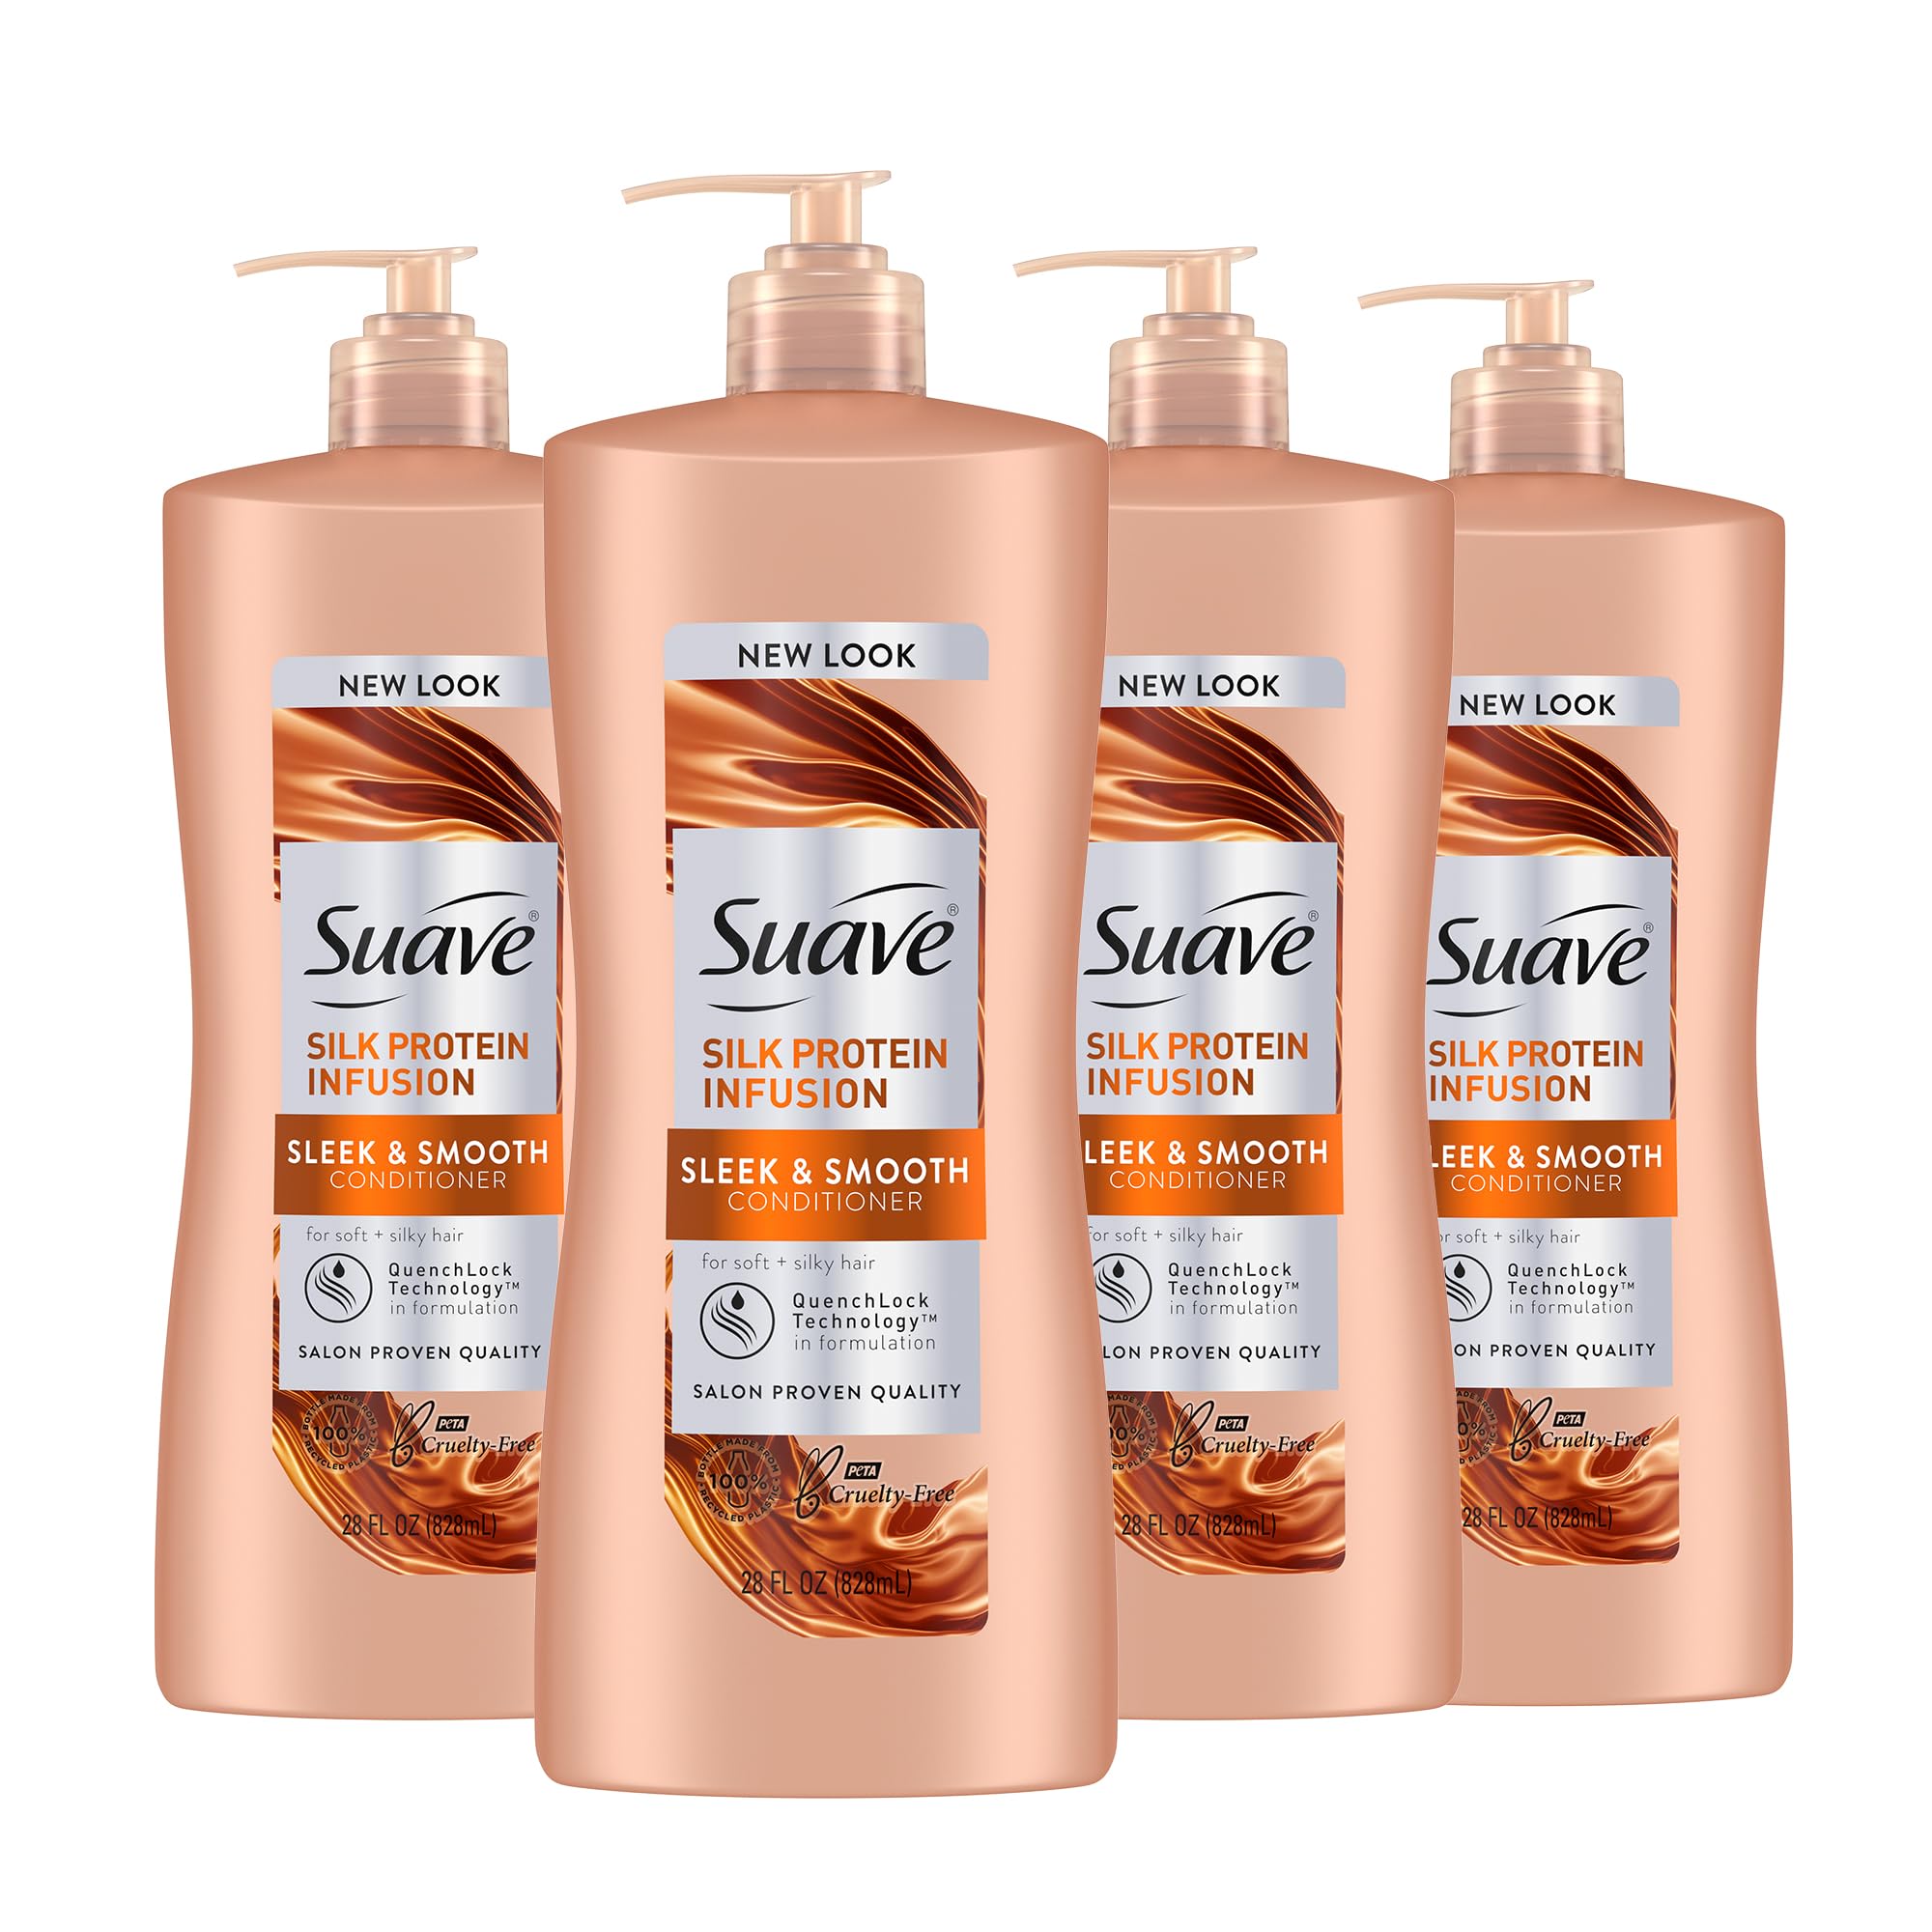 Suave Silk Protein Infusion Conditioner, Sleek and Smooth, for Soft Hair and Frizz Control, 28 oz Pack of 4